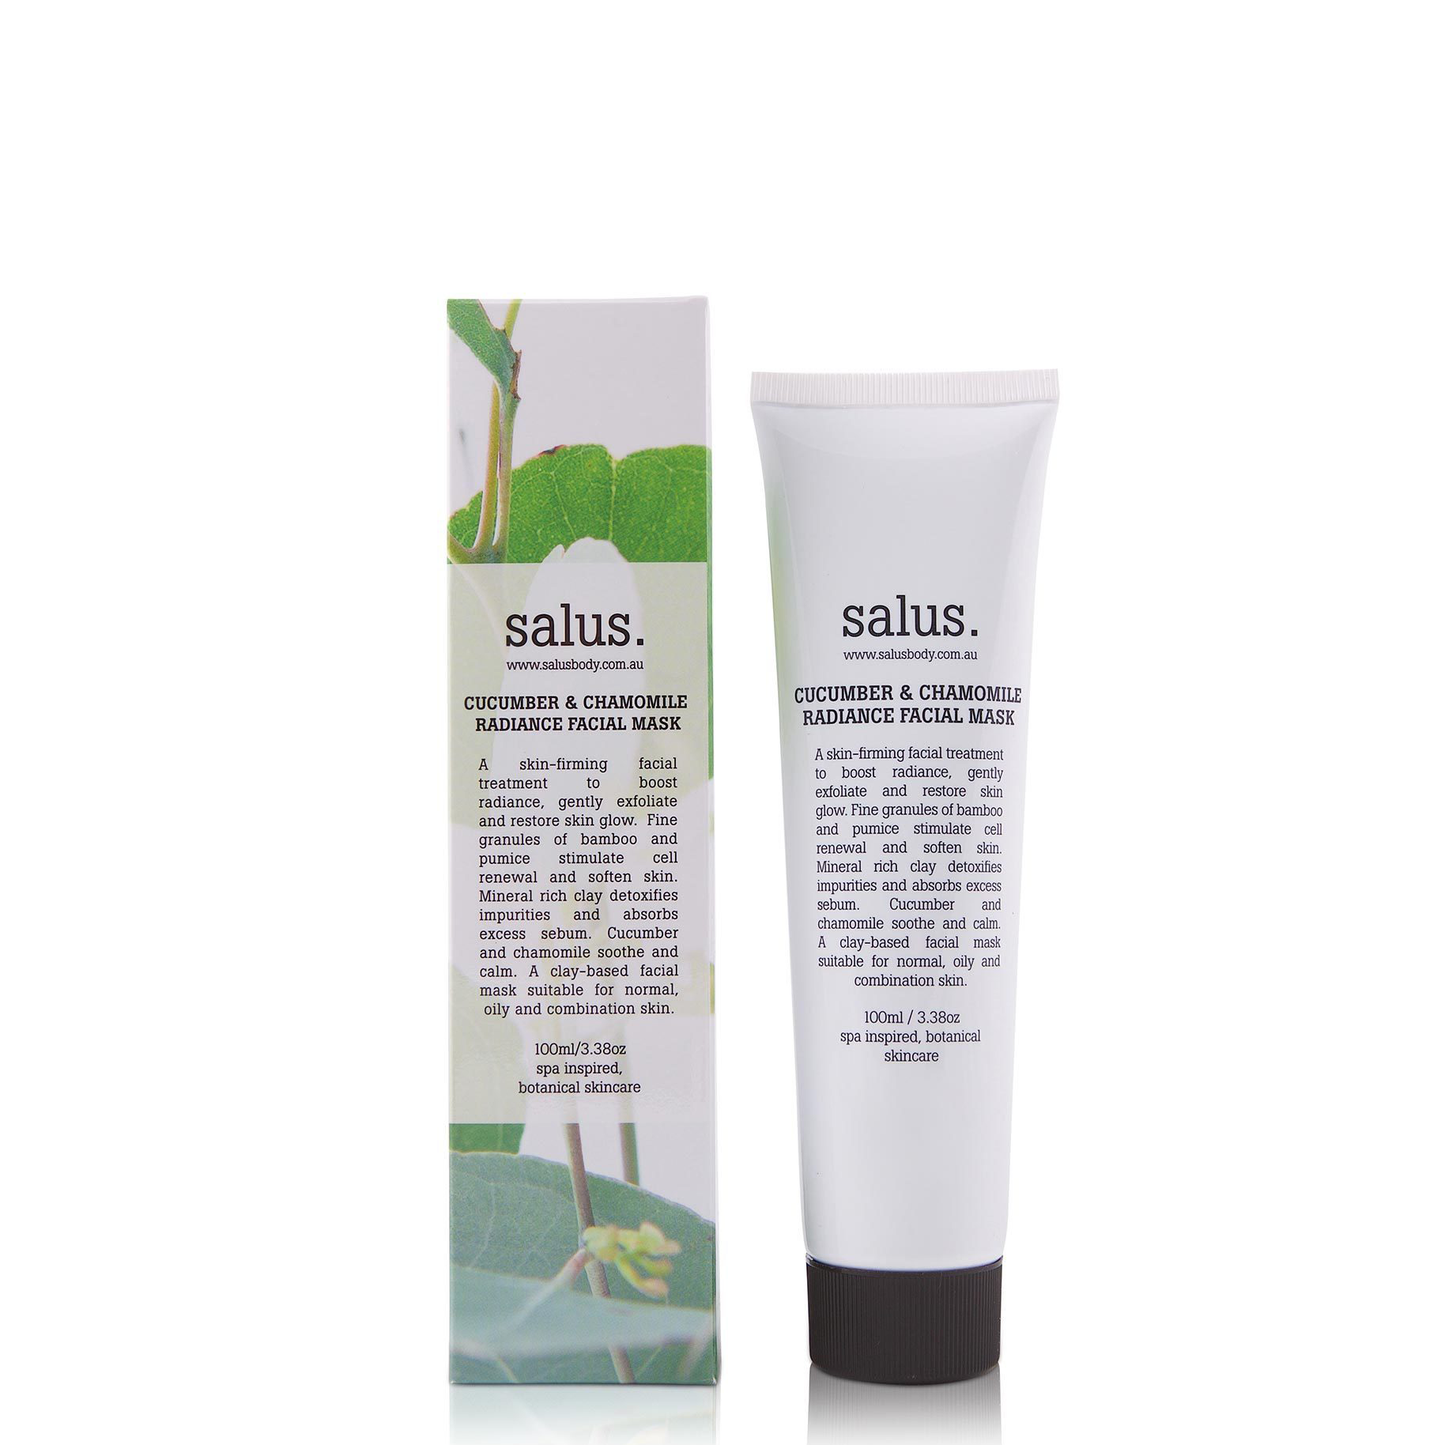 Cucumber & Chamomile Radiance Facial Mask (100ml)   A skin-firming facial treatment to boost radiance, gently exfoliate and restore skin glow. Fine granules of bamboo and pumice stimulate cell renewal and soften skin.